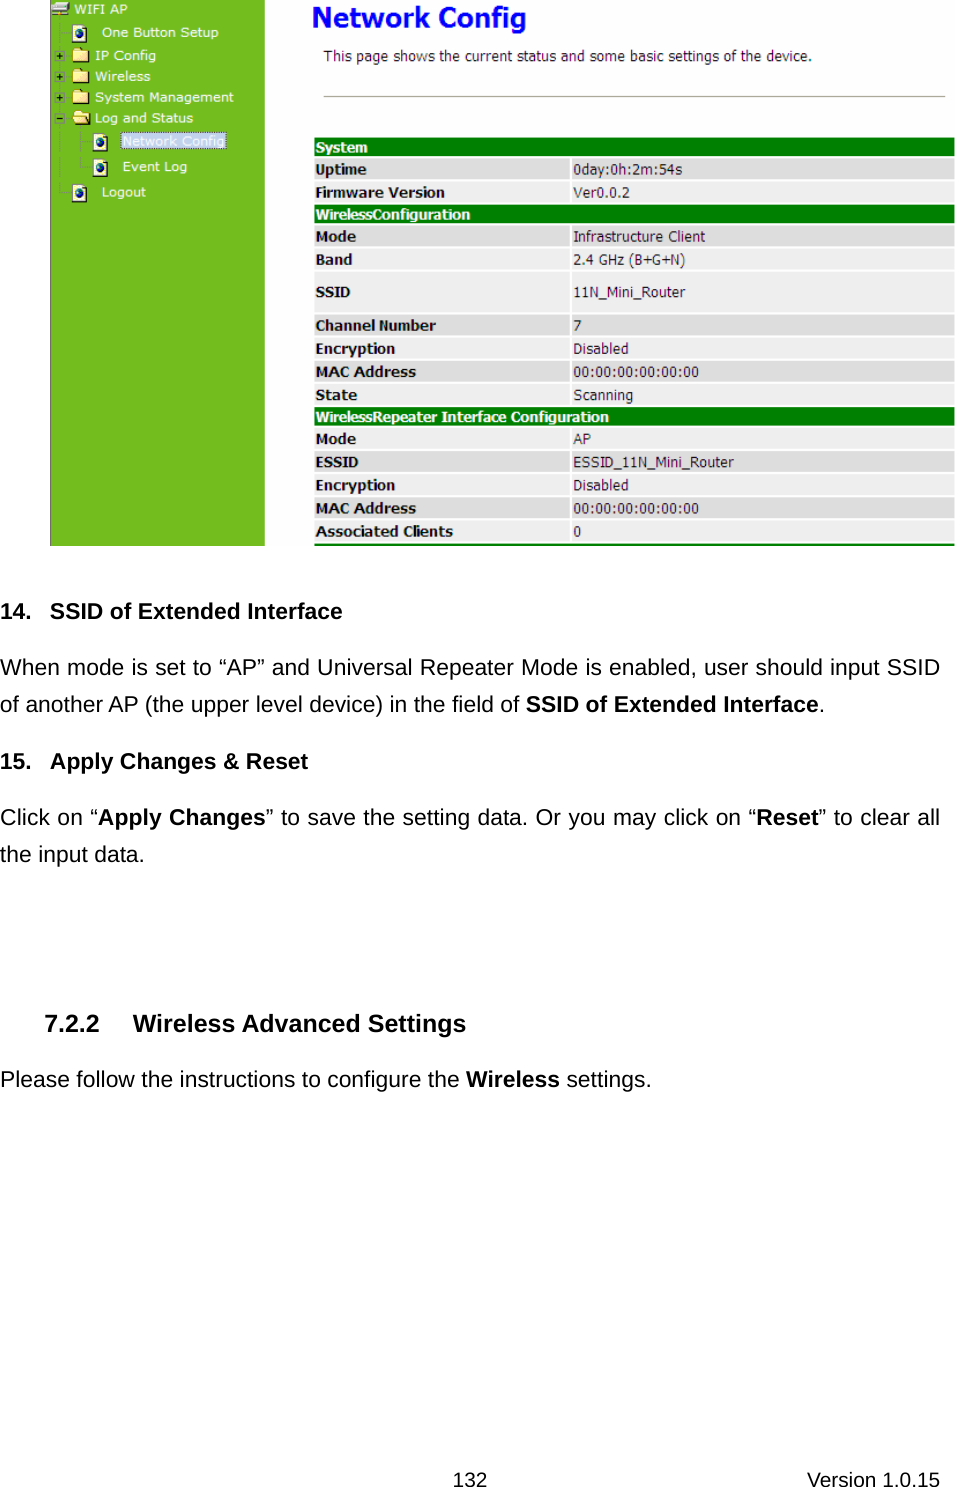 Version 1.0.15 132  14.  SSID of Extended Interface When mode is set to “AP” and Universal Repeater Mode is enabled, user should input SSID of another AP (the upper level device) in the field of SSID of Extended Interface.  15.  Apply Changes &amp; Reset Click on “Apply Changes” to save the setting data. Or you may click on “Reset” to clear all the input data.    7.2.2 Wireless Advanced Settings Please follow the instructions to configure the Wireless settings.  